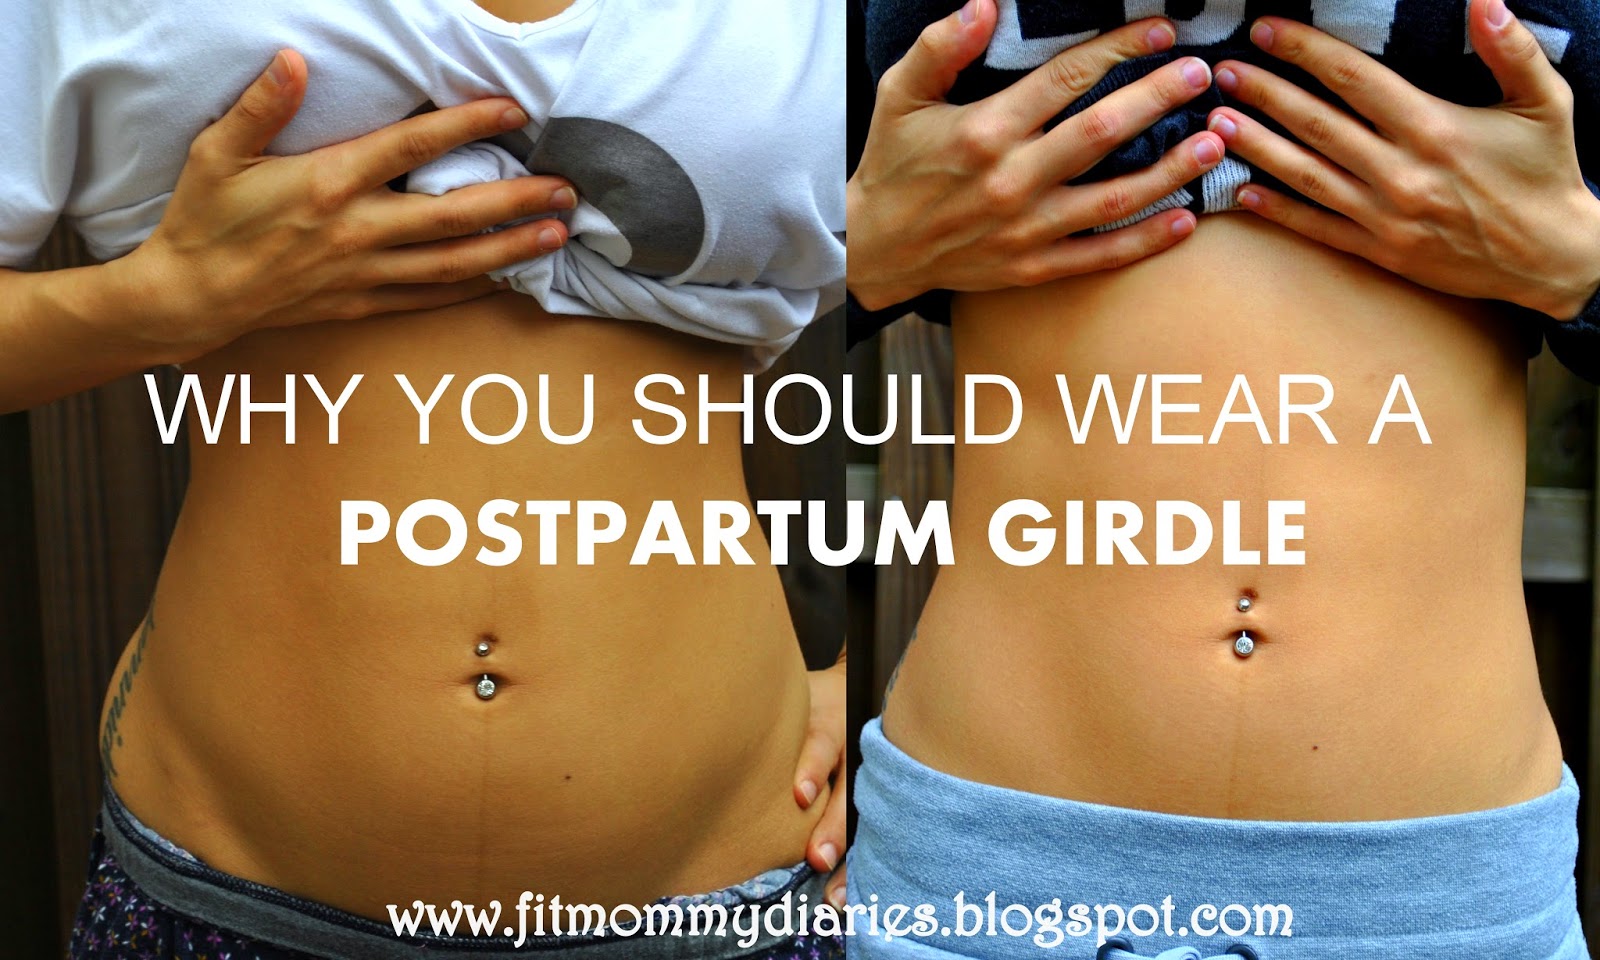 Diary of a Fit Mommy: Why You Should Use a Postpartum Girdle After